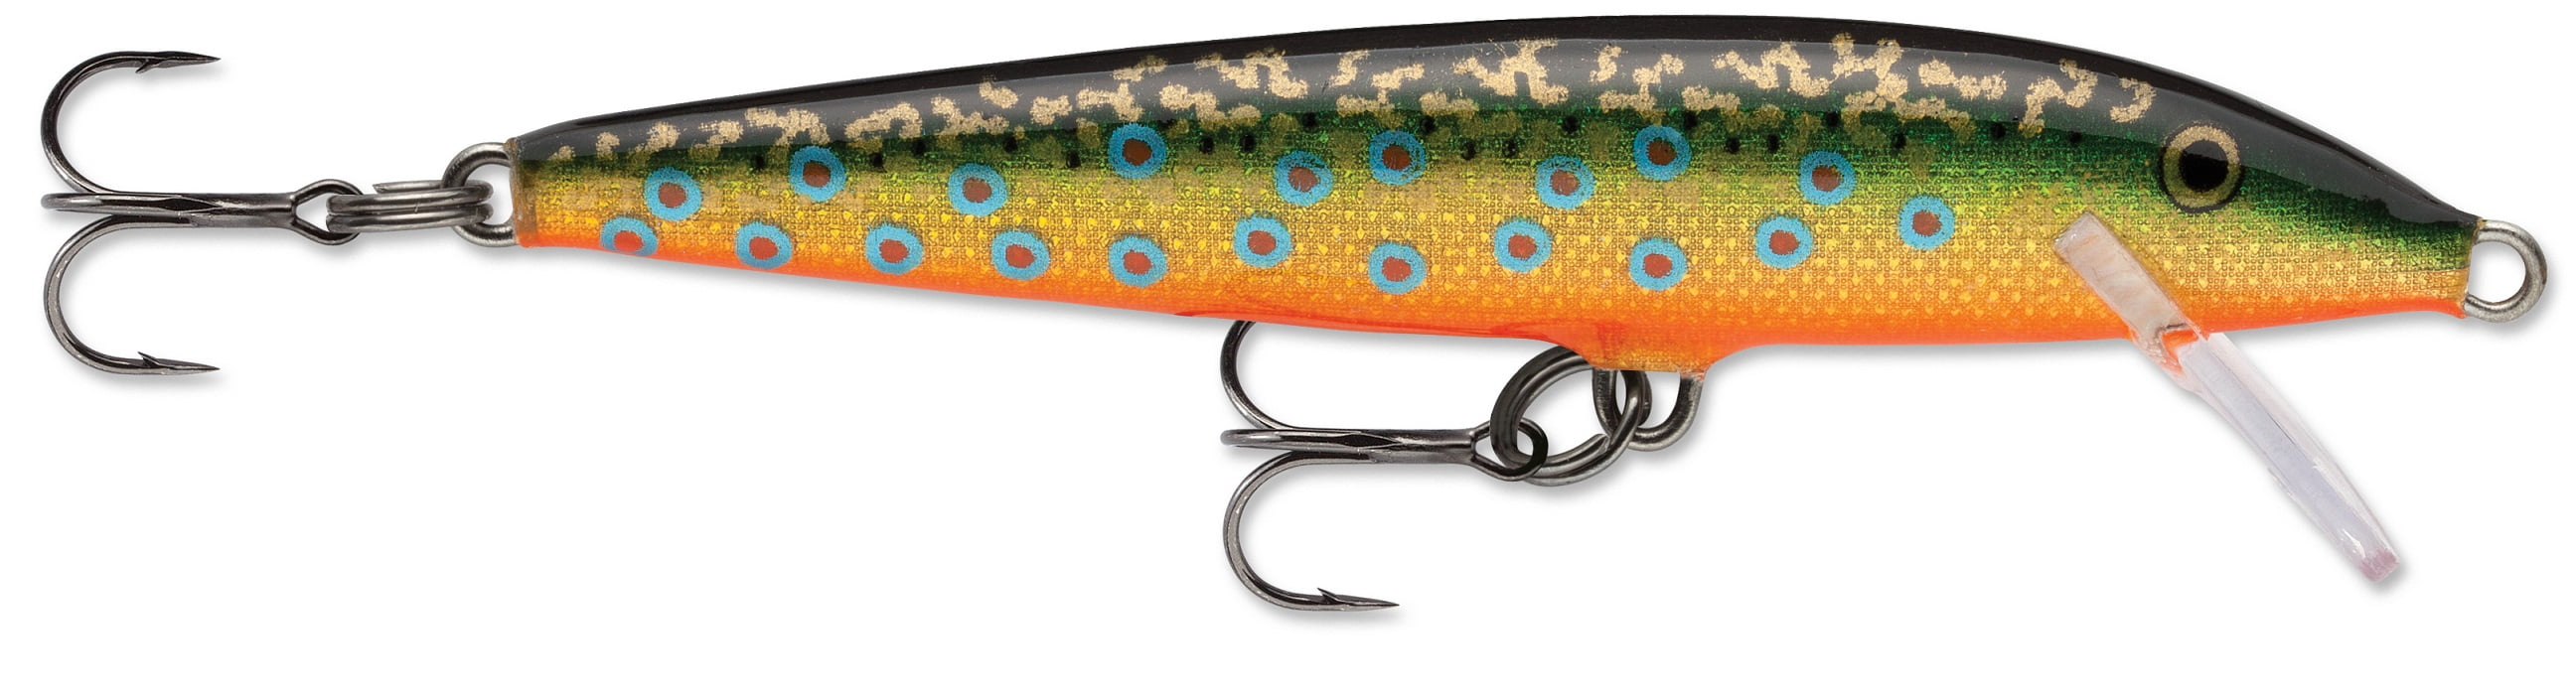 Boone 3 Spinana BLUE Fishing Lure #50006